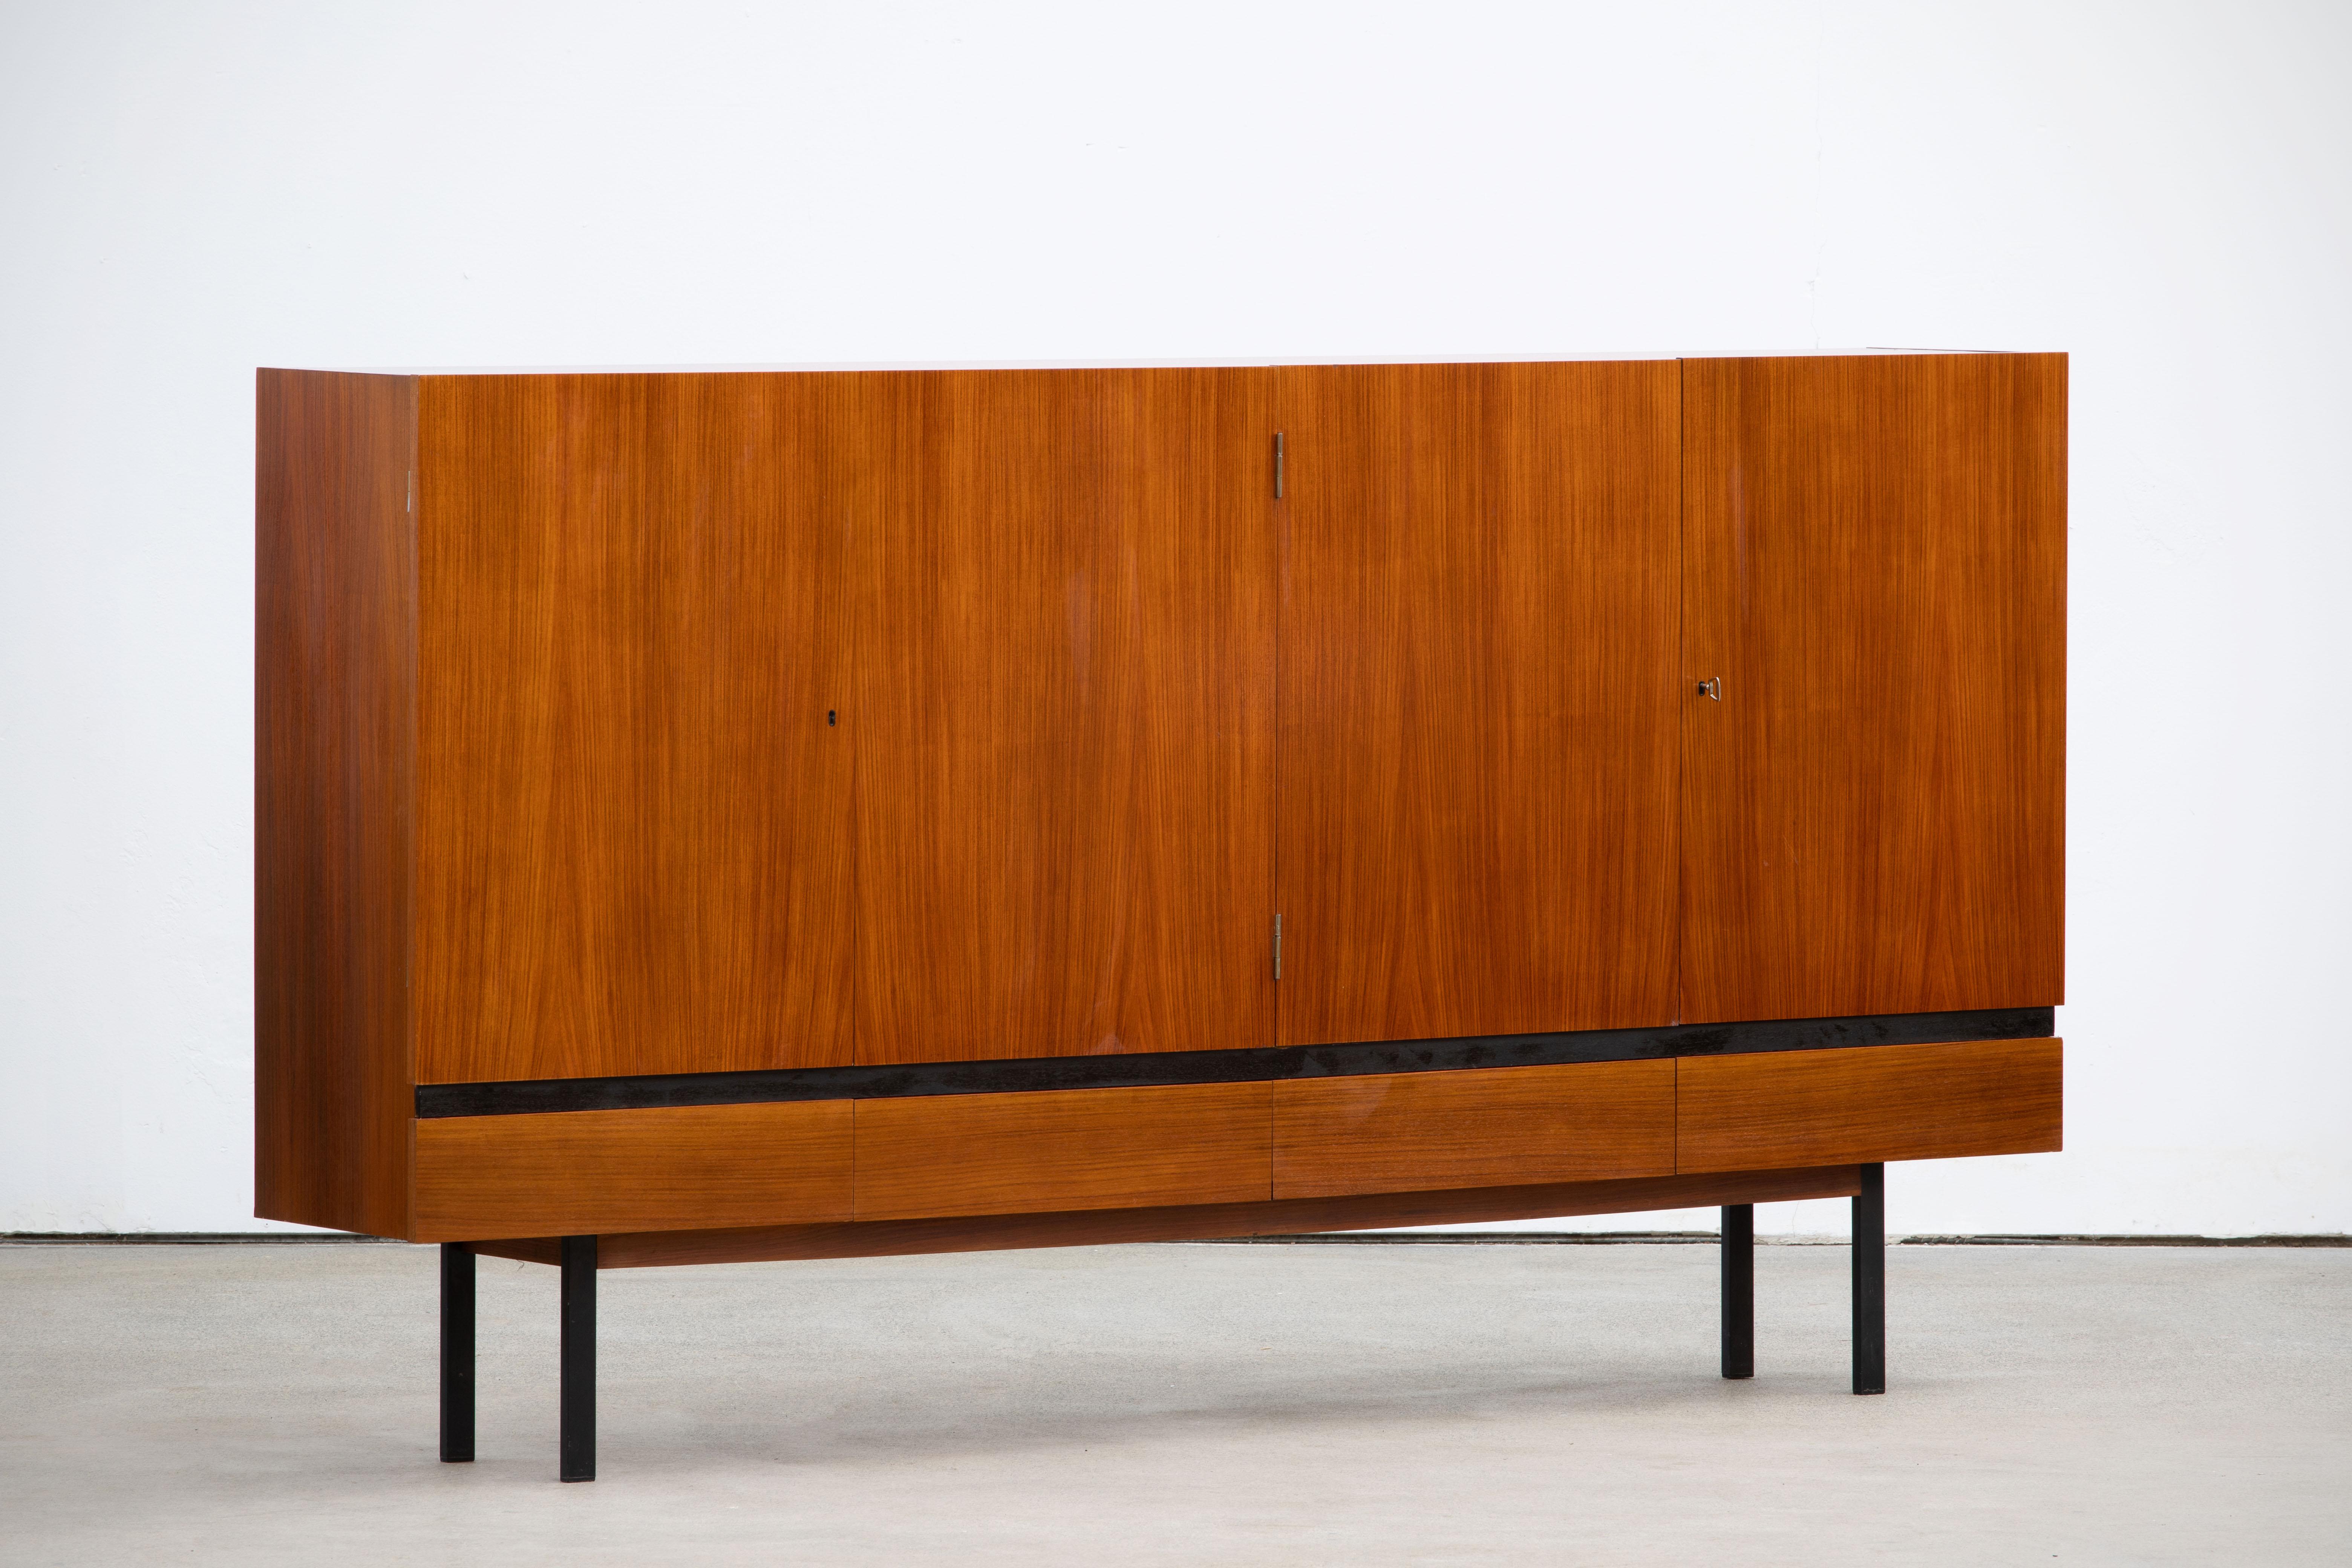 Stunning Minimalist mid-century teak highboard, 1960s, fully lined (four) drawers and stands on nice legs, which makes the whole more elegant.